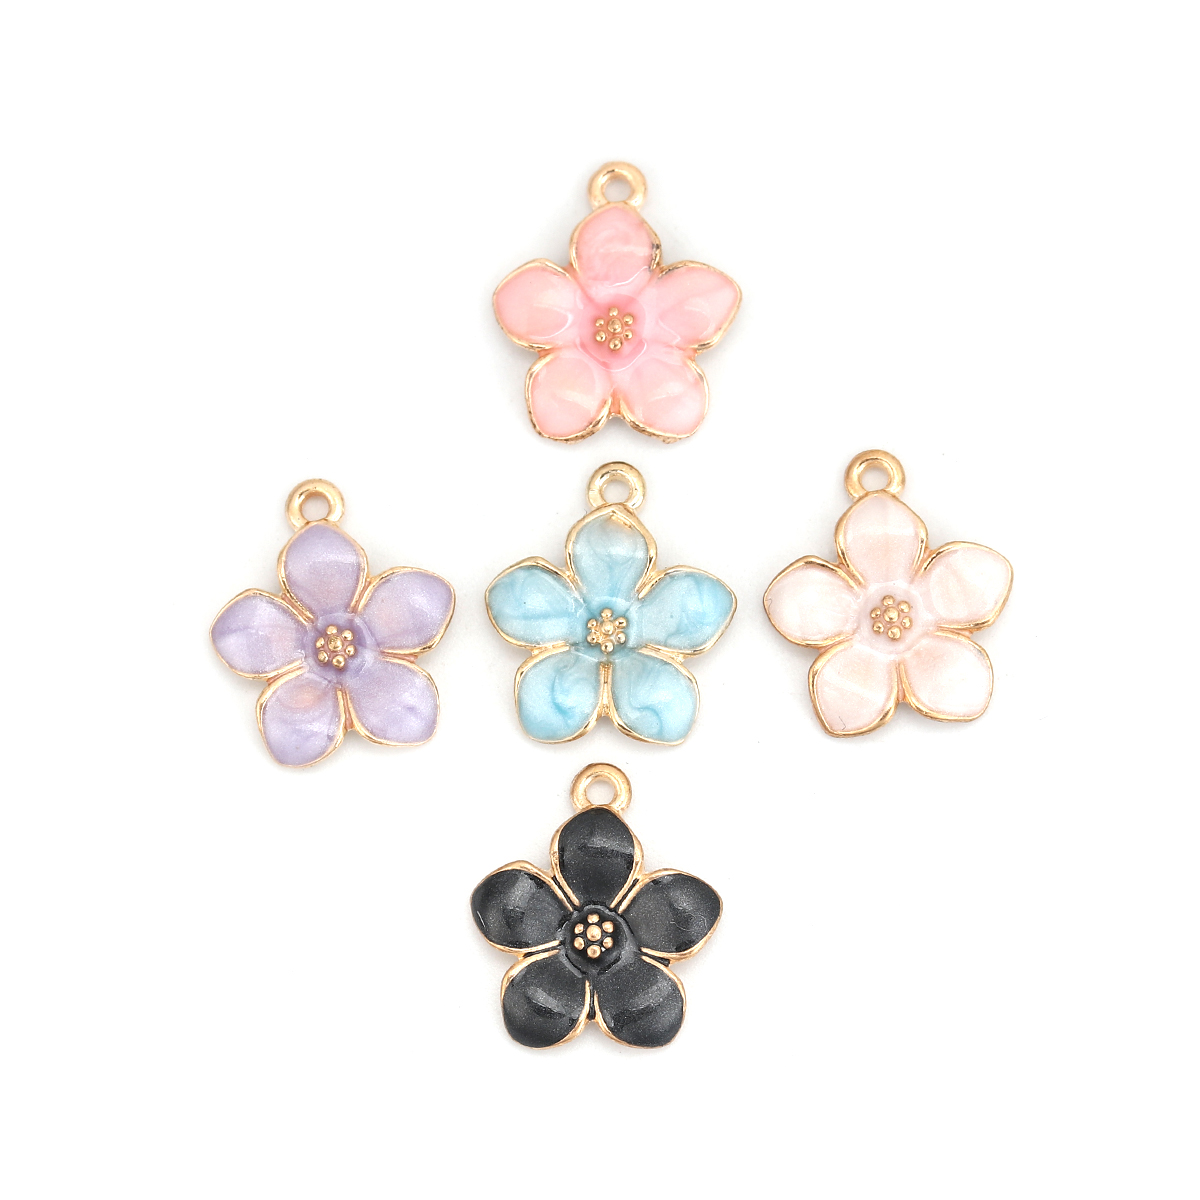 Picture of Zinc Based Alloy Charms Flower Gold Plated Black Enamel 17mm( 5/8") x 15mm( 5/8"), 20 PCs